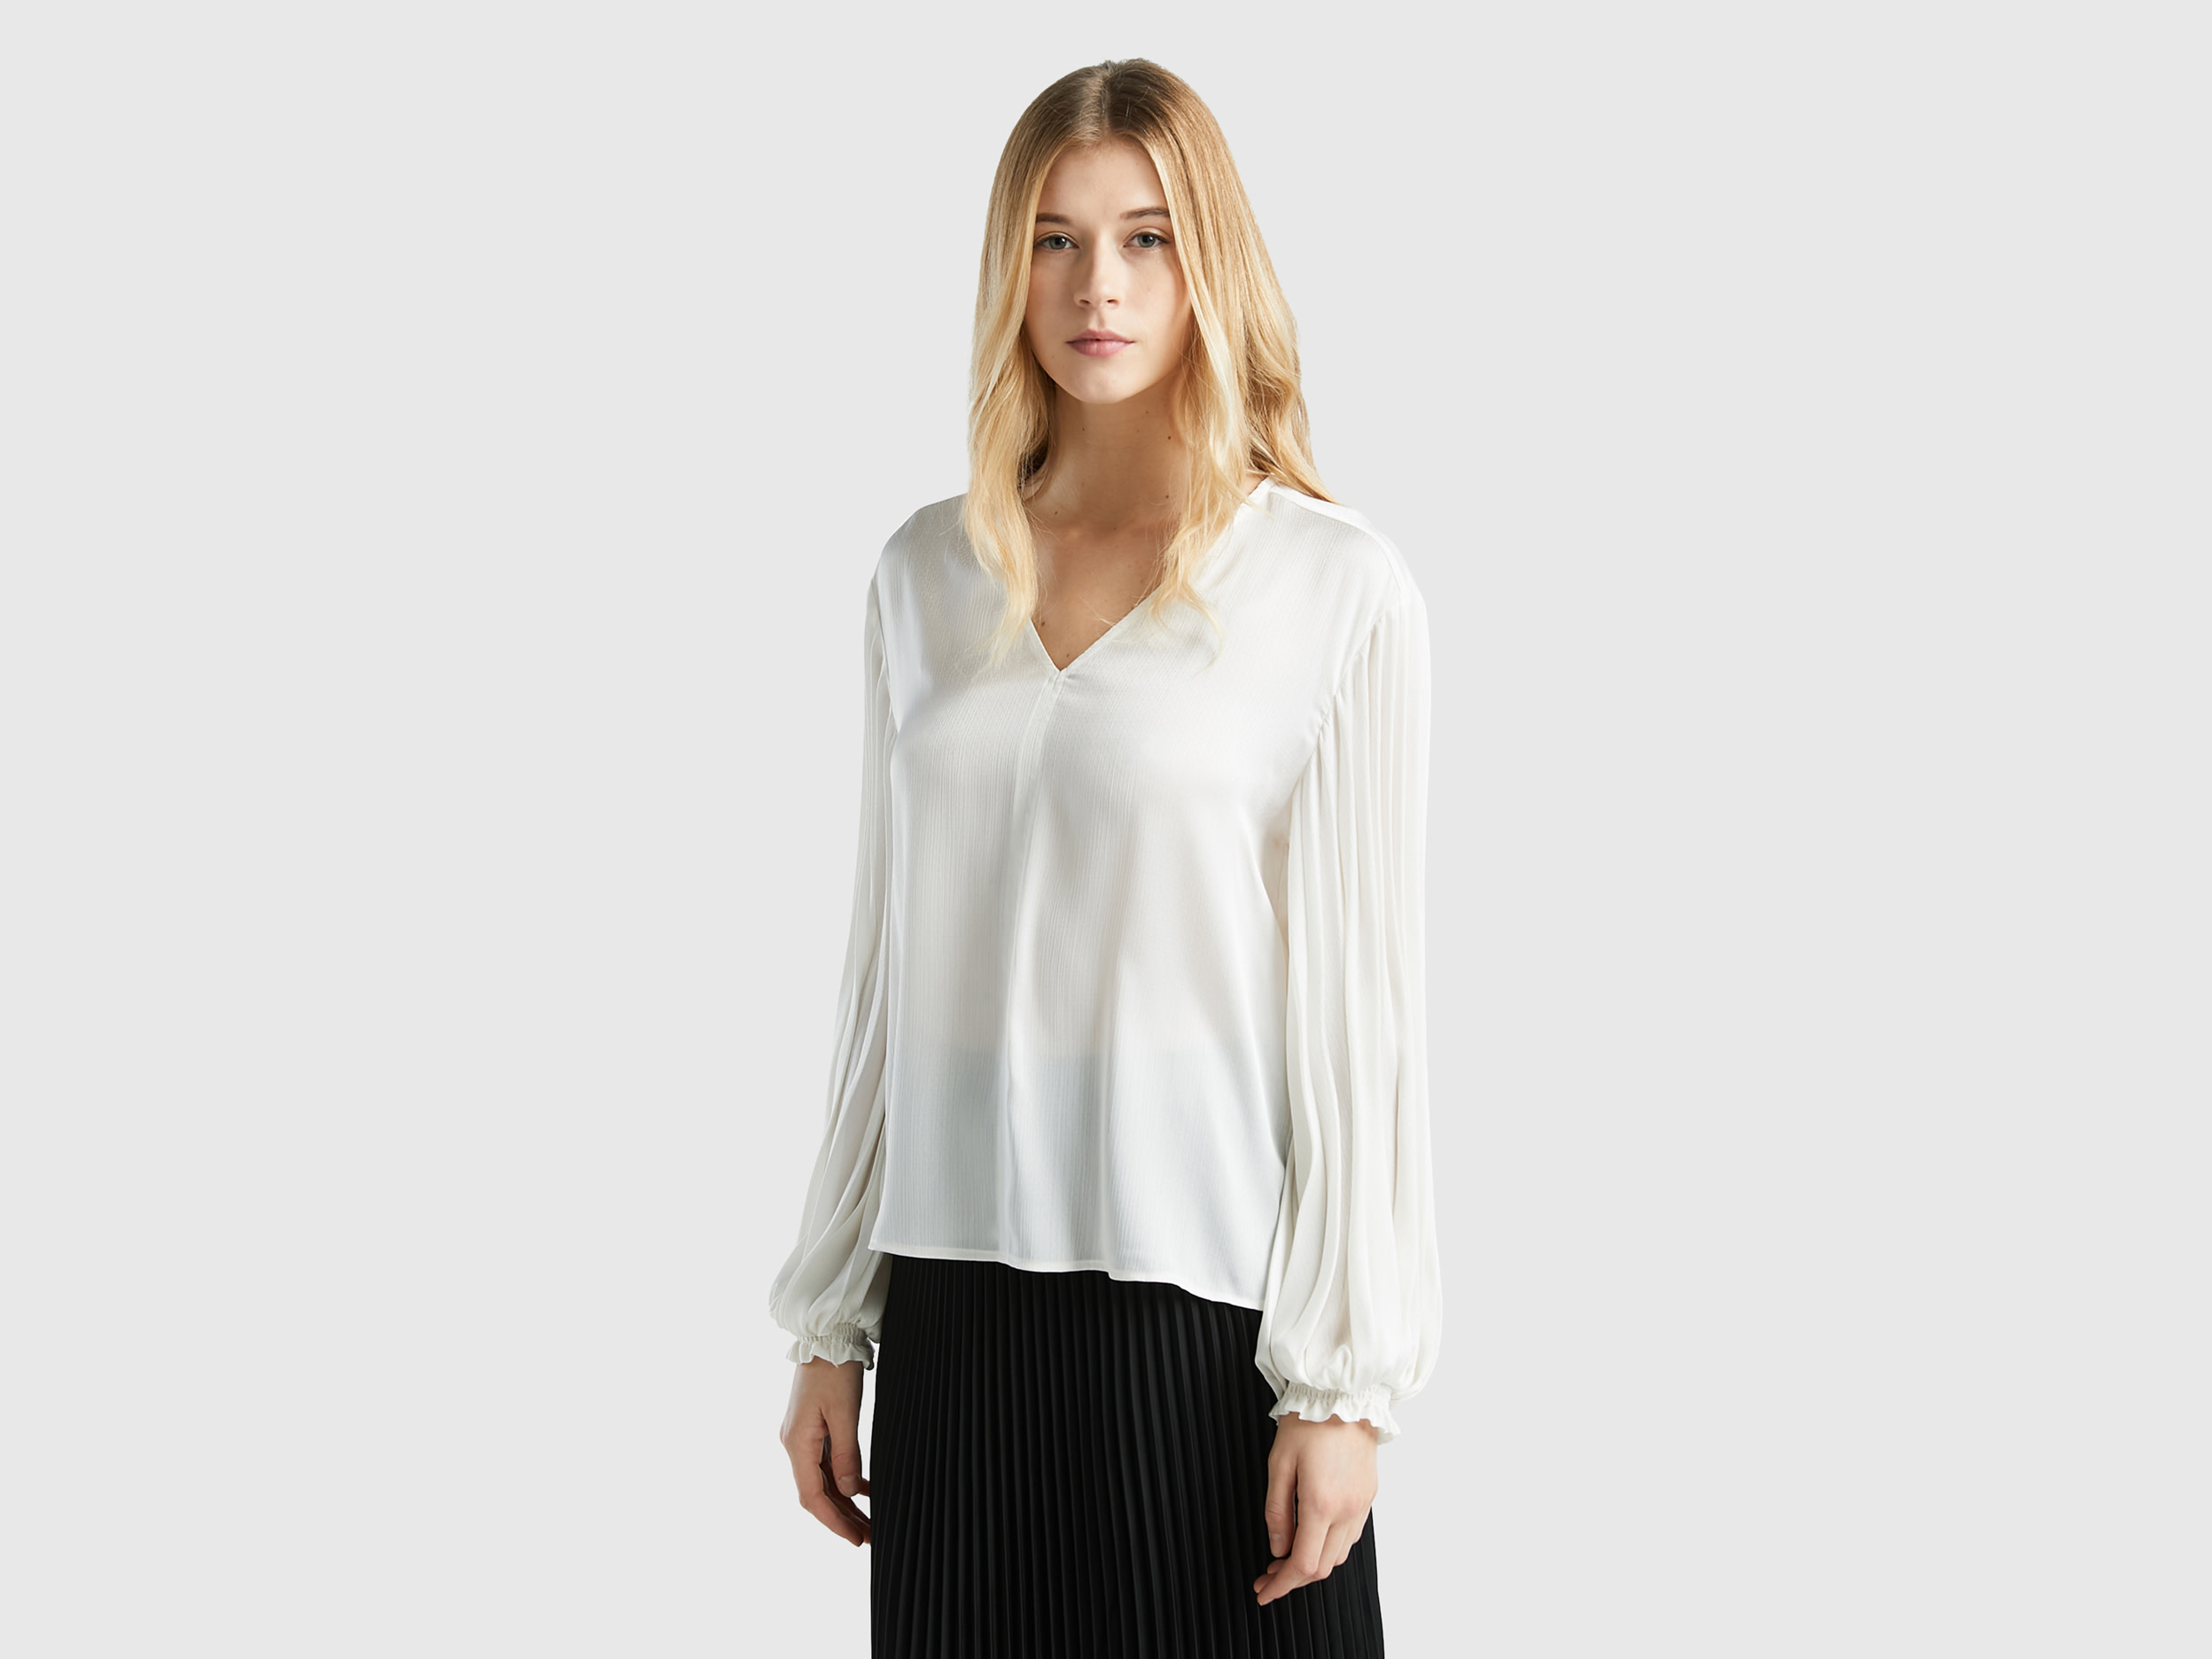 Benetton, Blouse With Long Pleated Sleeves, size L, Creamy White, Women